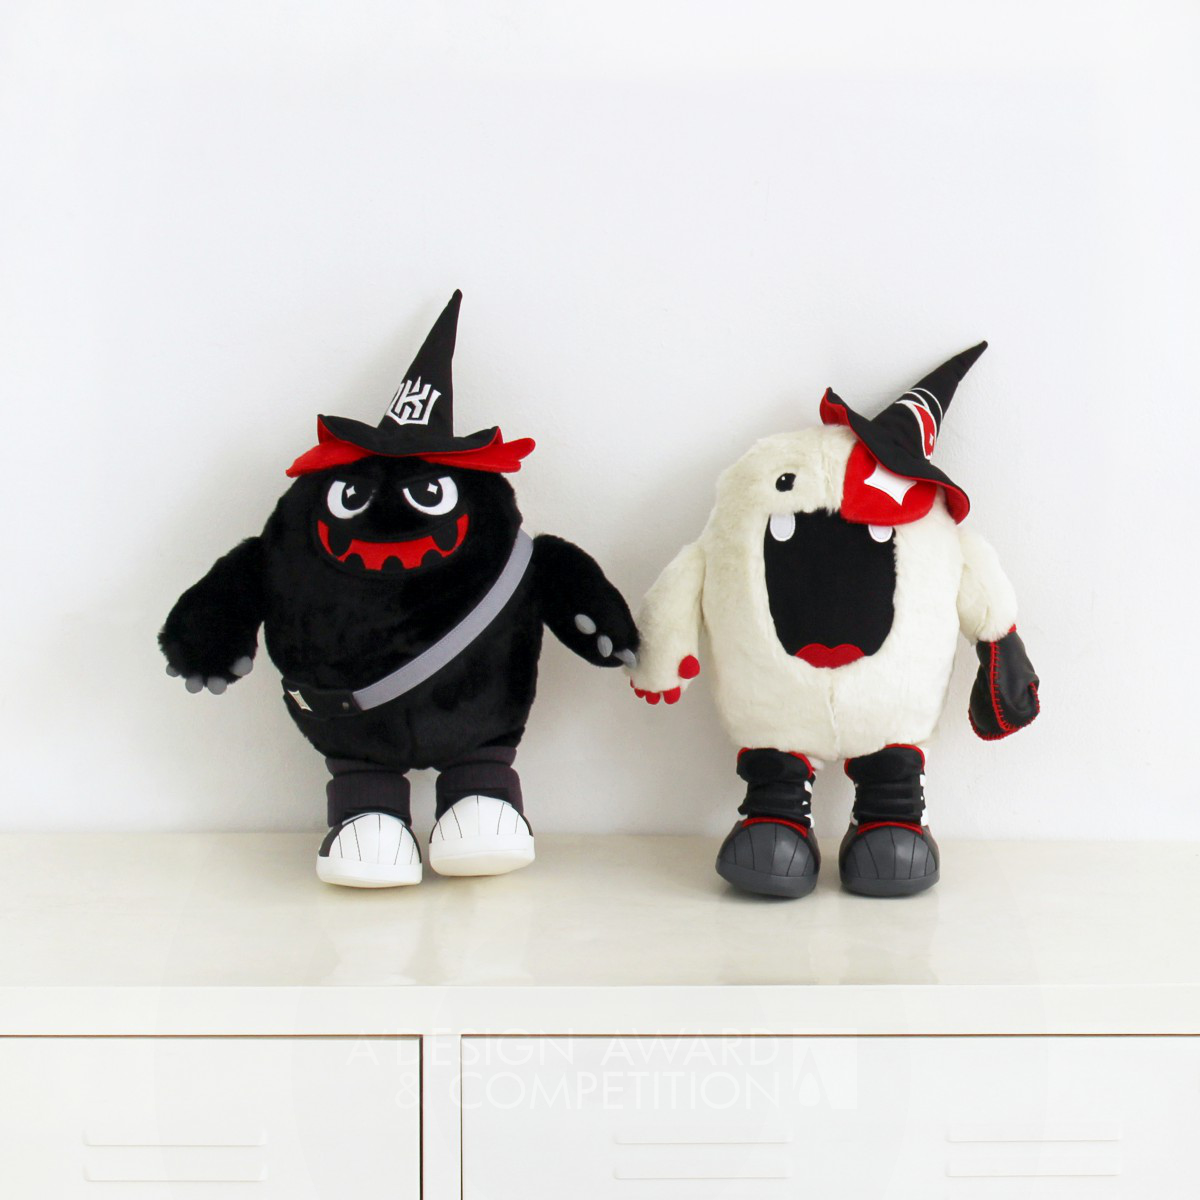 vic &amp; ddory (Mascot) Sports Brand Mascot Toy Collection